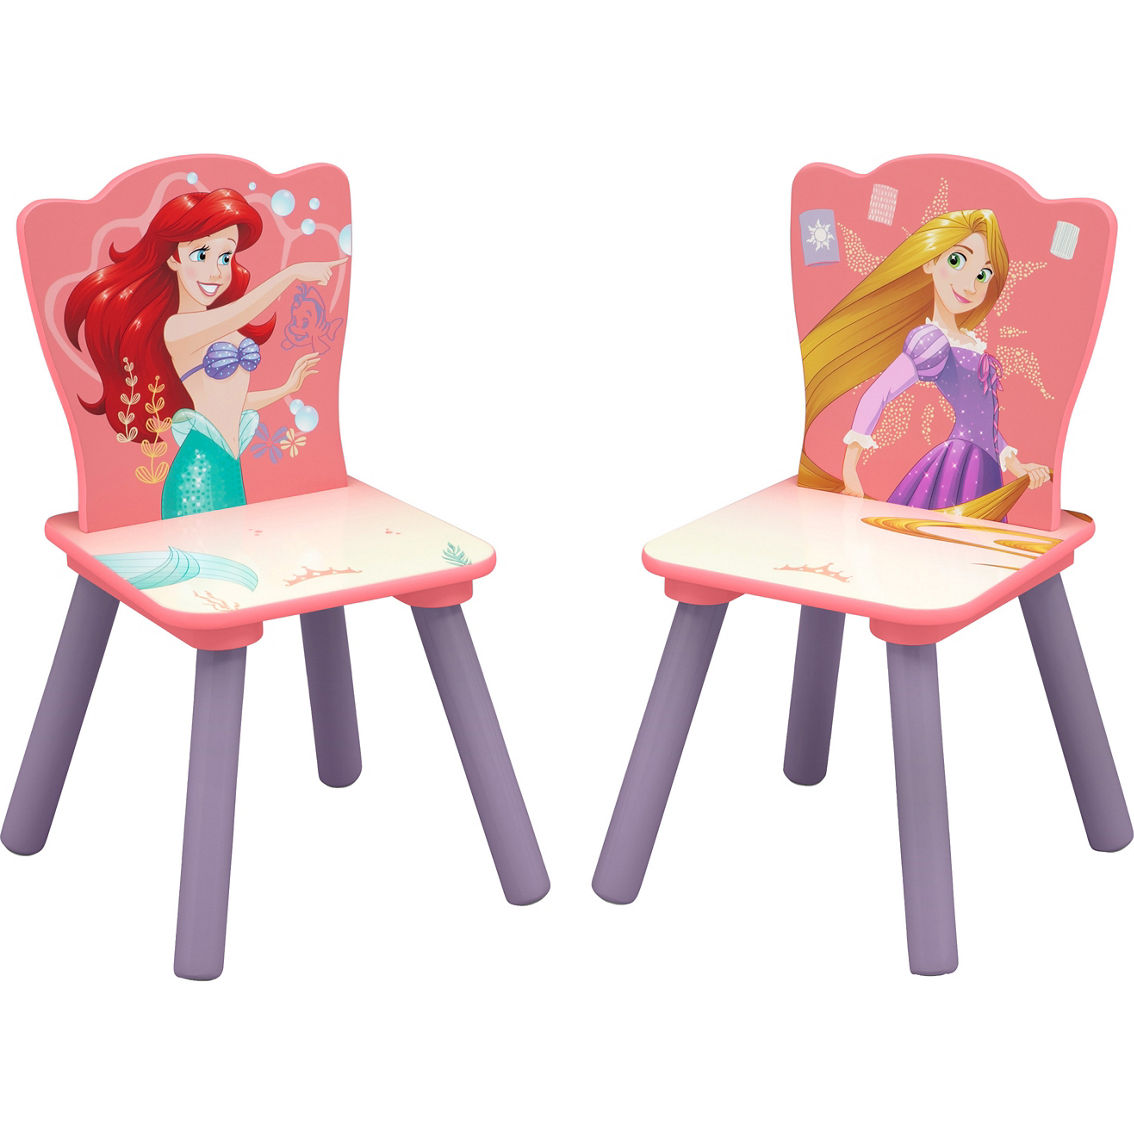 Delta Children Disney Princess Table and Chair Set with Storage - Image 3 of 5